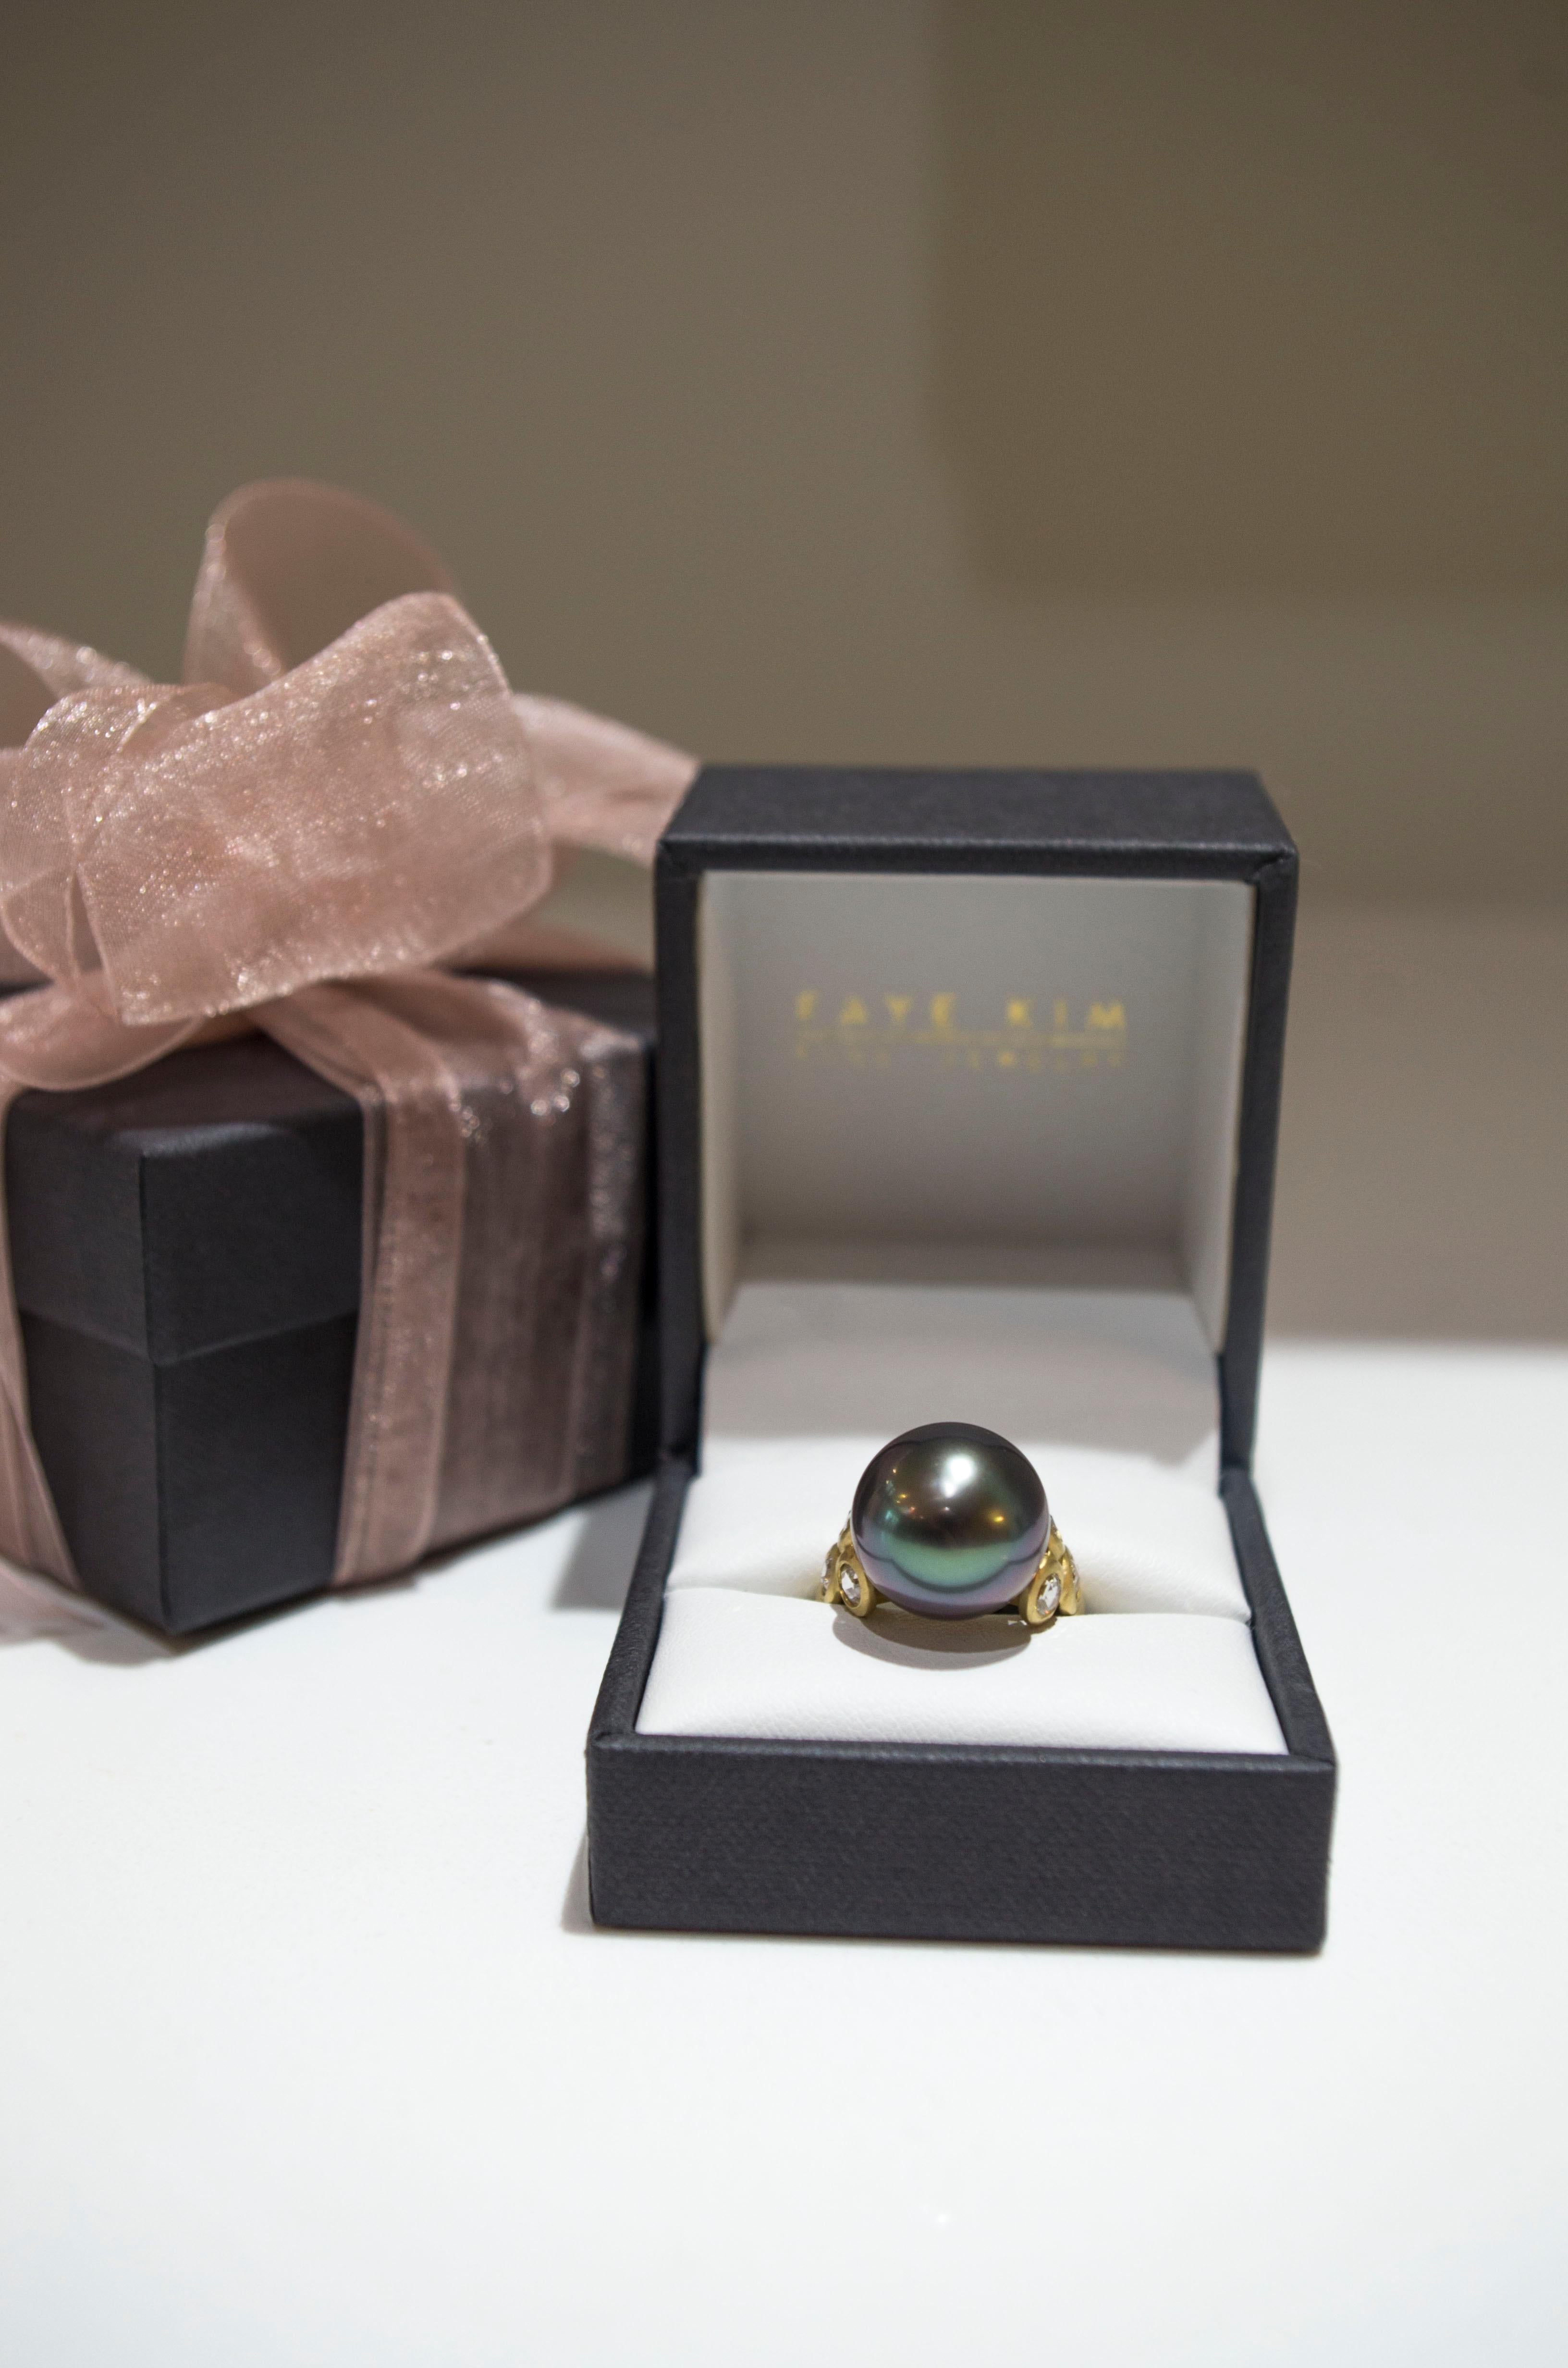 Contemporary Faye Kim 18 Karat Gold South Sea Tahitian Pearl and Diamond Cocktail Ring For Sale